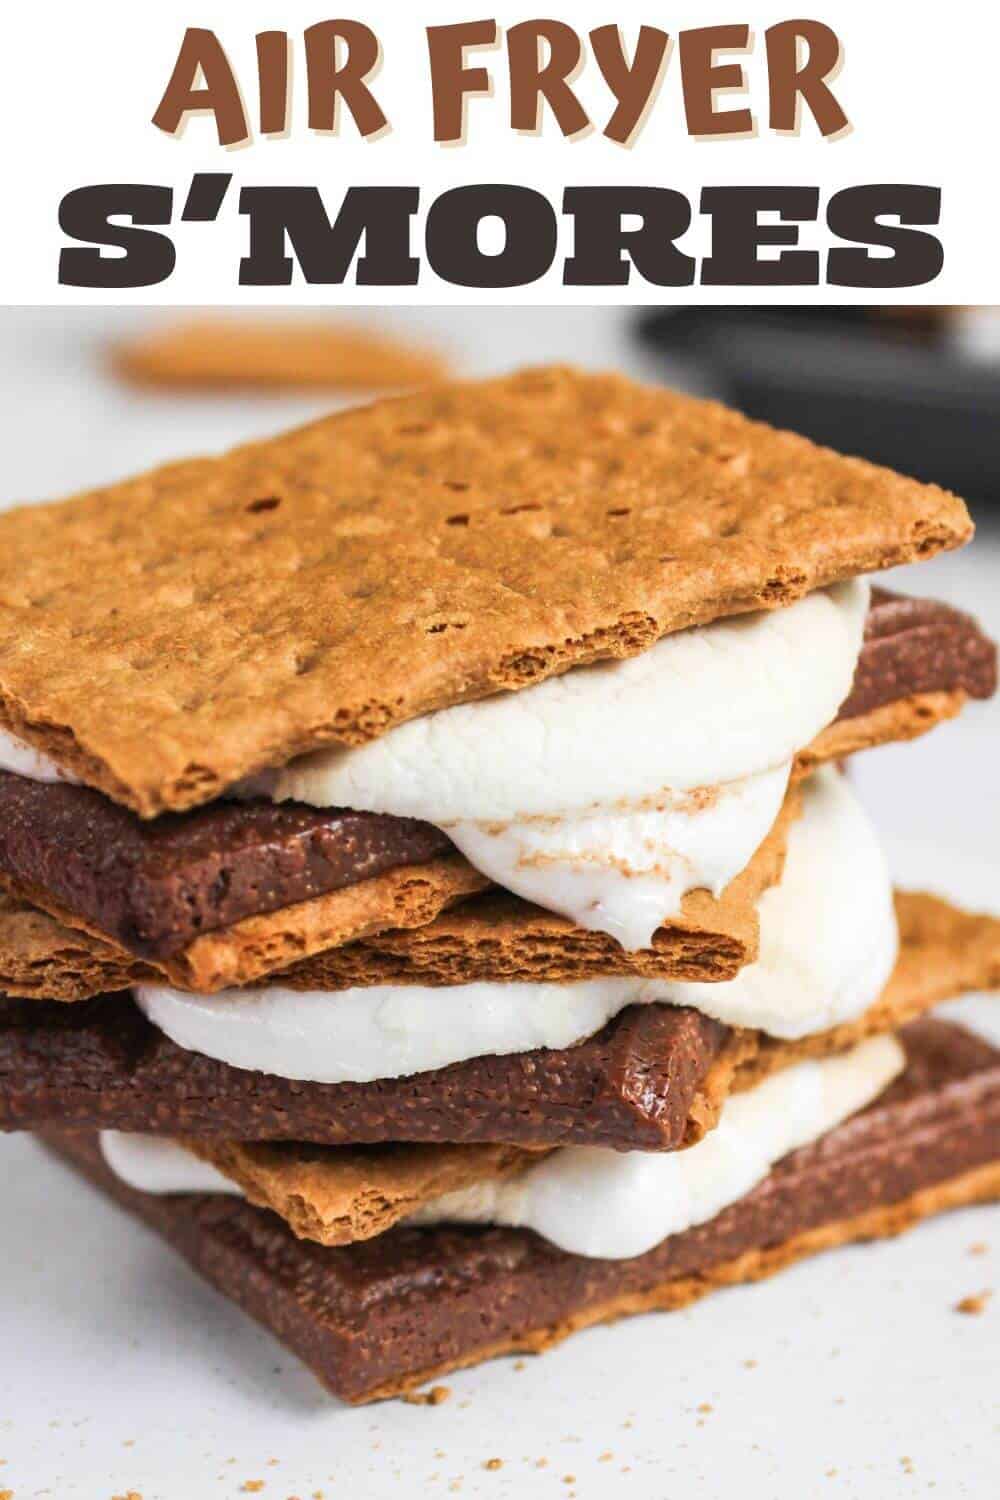 A stack of air fryer s'mores with the text air fryer s'mores.